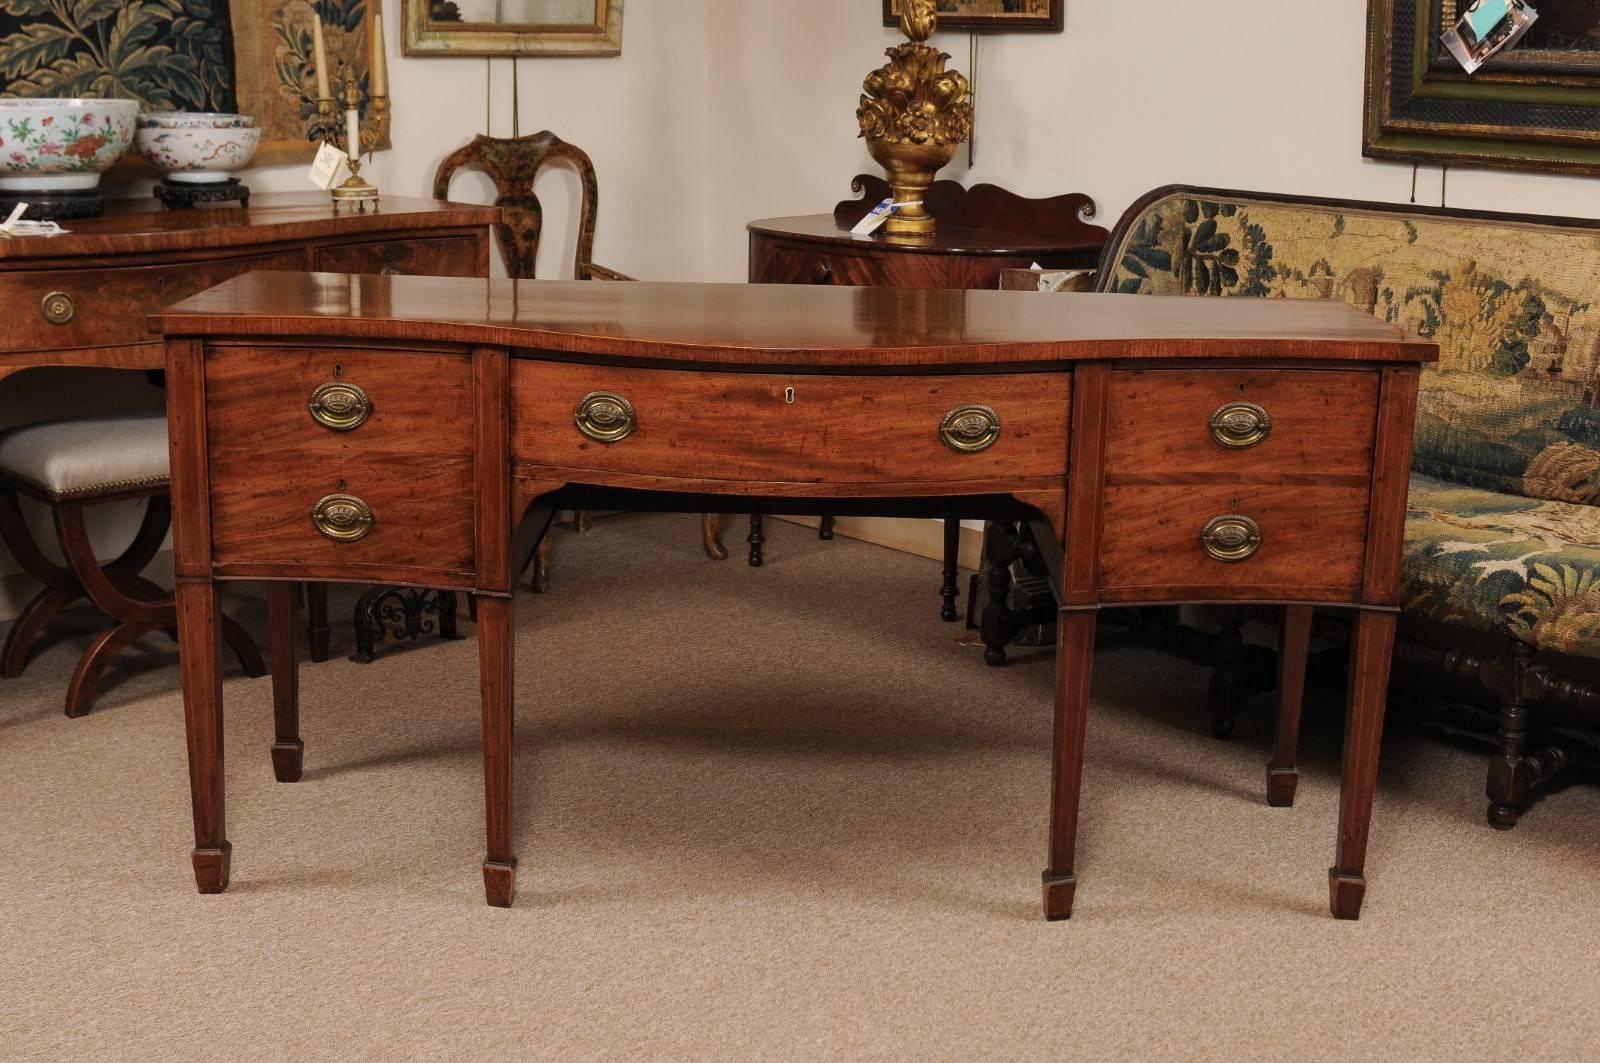 The George III mahogany sideboard with serpentine form, kingswood crossbanding and string boxwood inlay. The frieze with long center drawer and two deep cellarette drawers on opposite sides. All supported by tapered legs terminating in spade